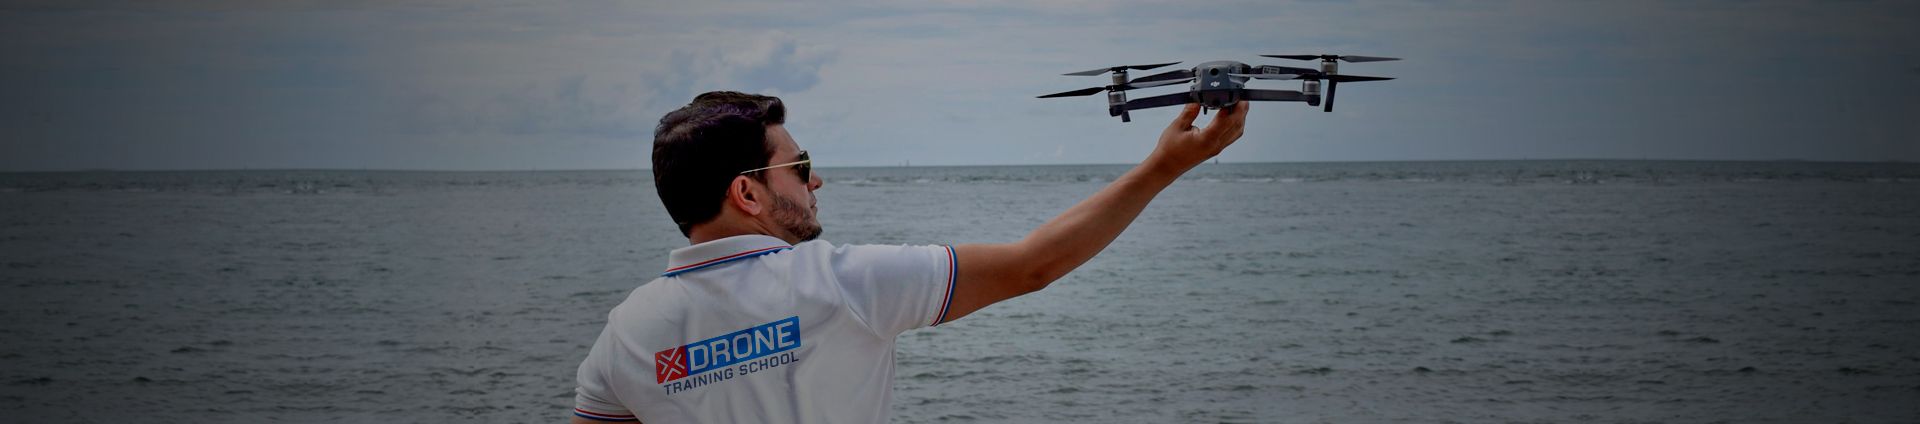 About drone training school